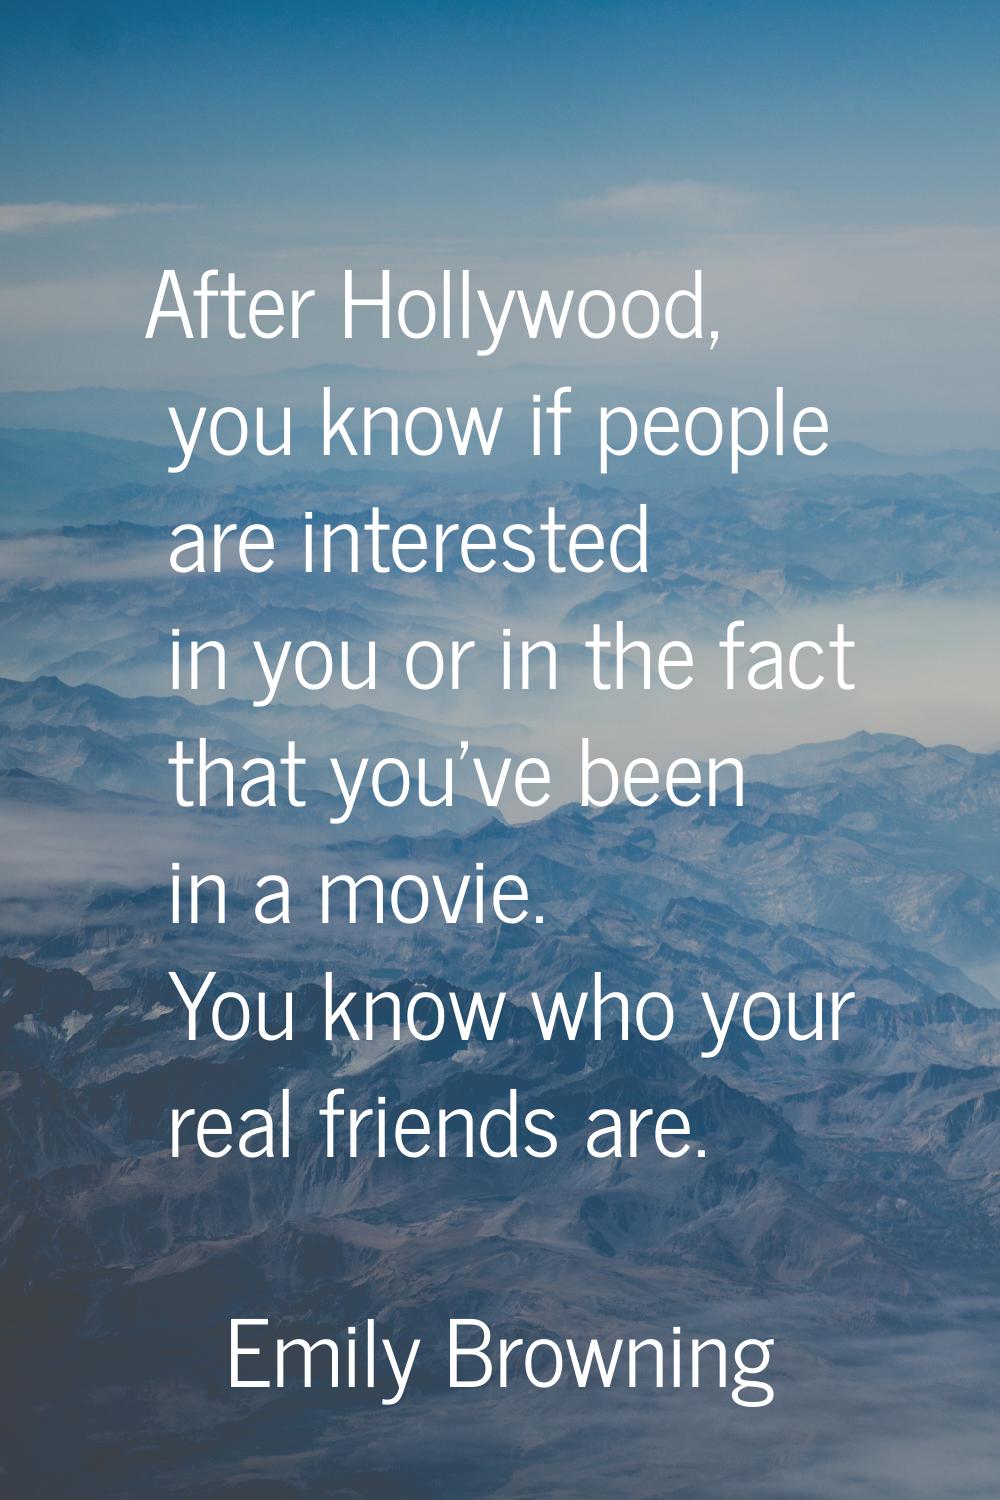 After Hollywood, you know if people are interested in you or in the fact that you've been in a movi